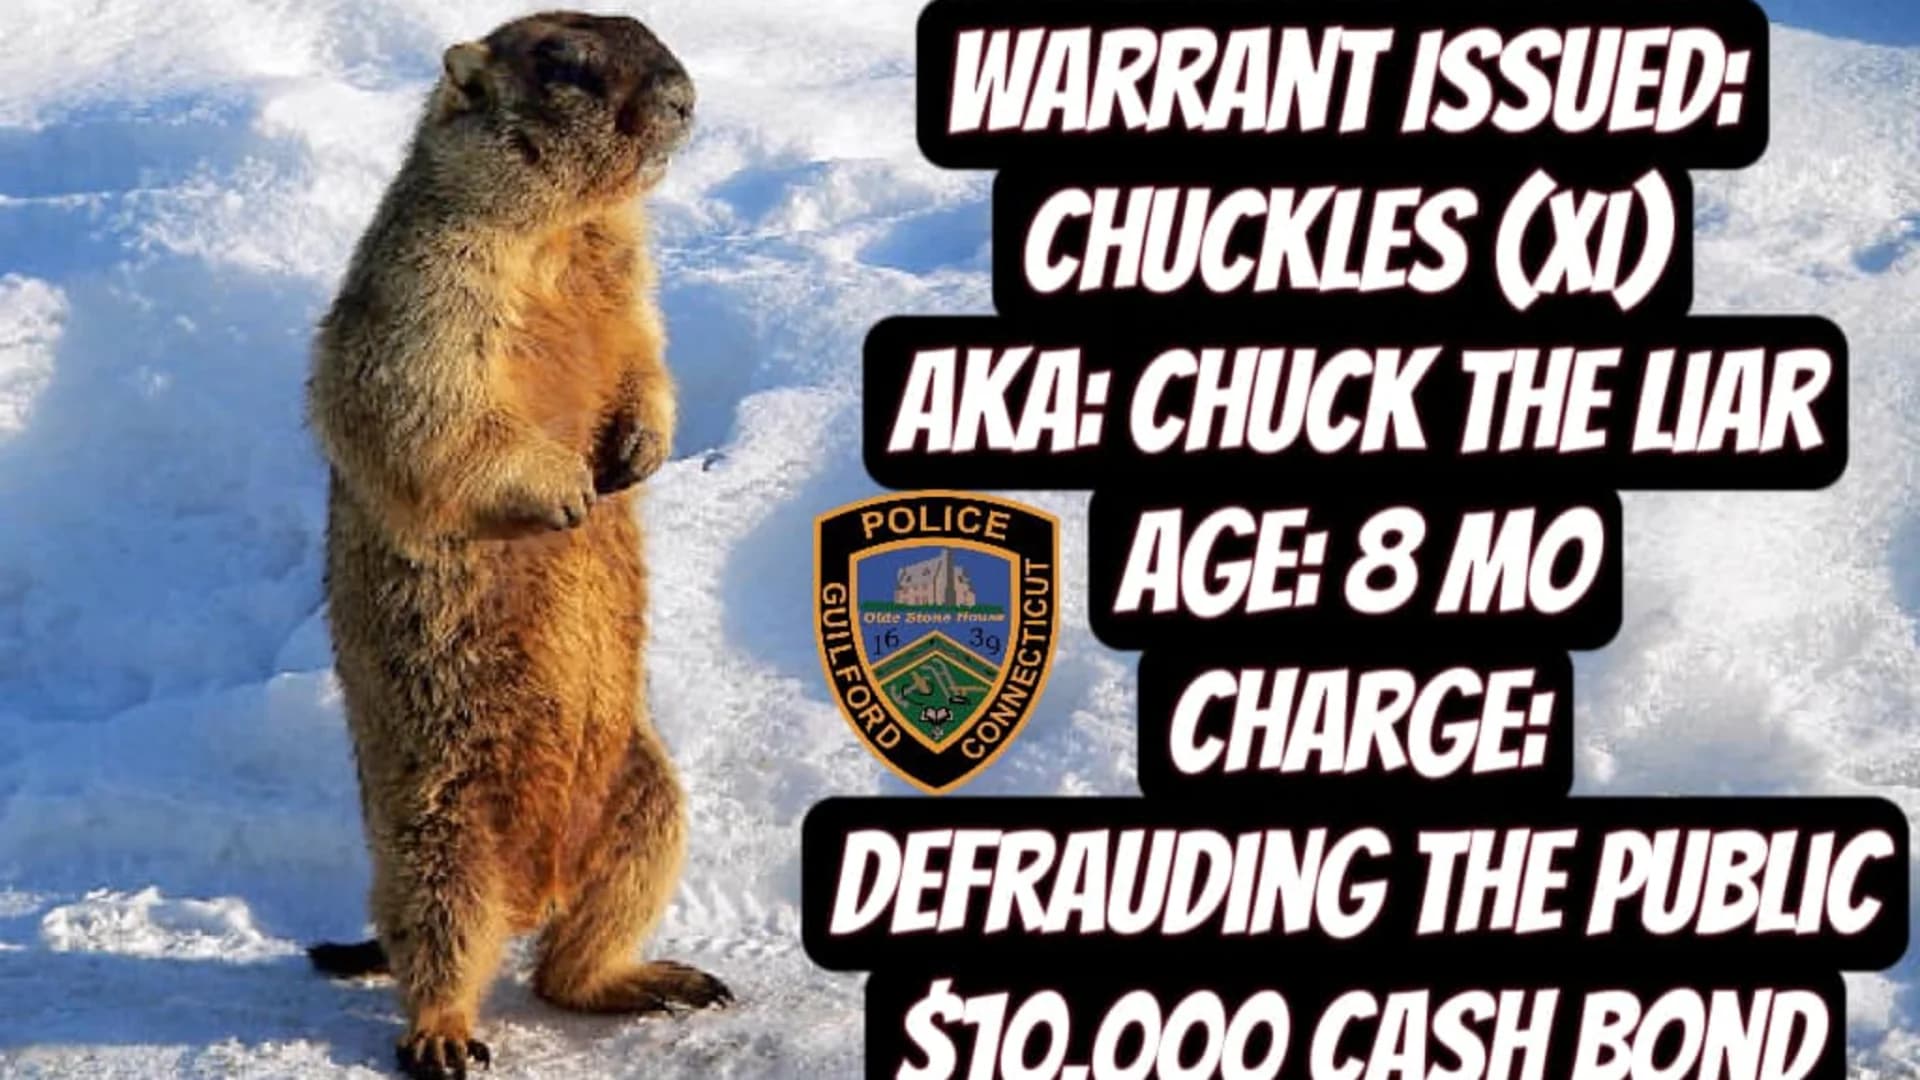 Guildford Police Department: Chuckles the groundhog to blame for cold weather and snow